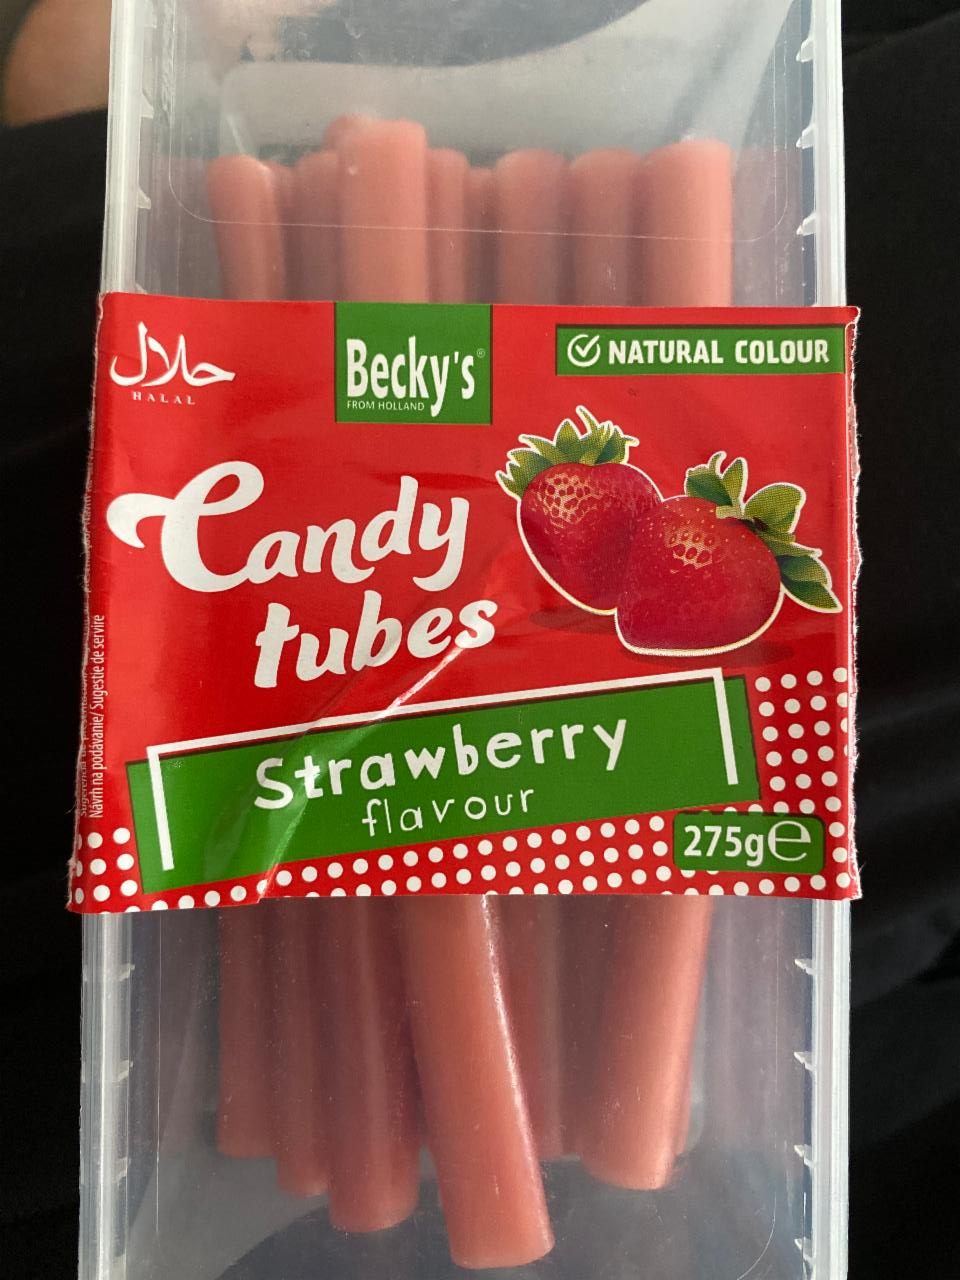 Fotografie - Candy tubes strawberry flavour Becky's